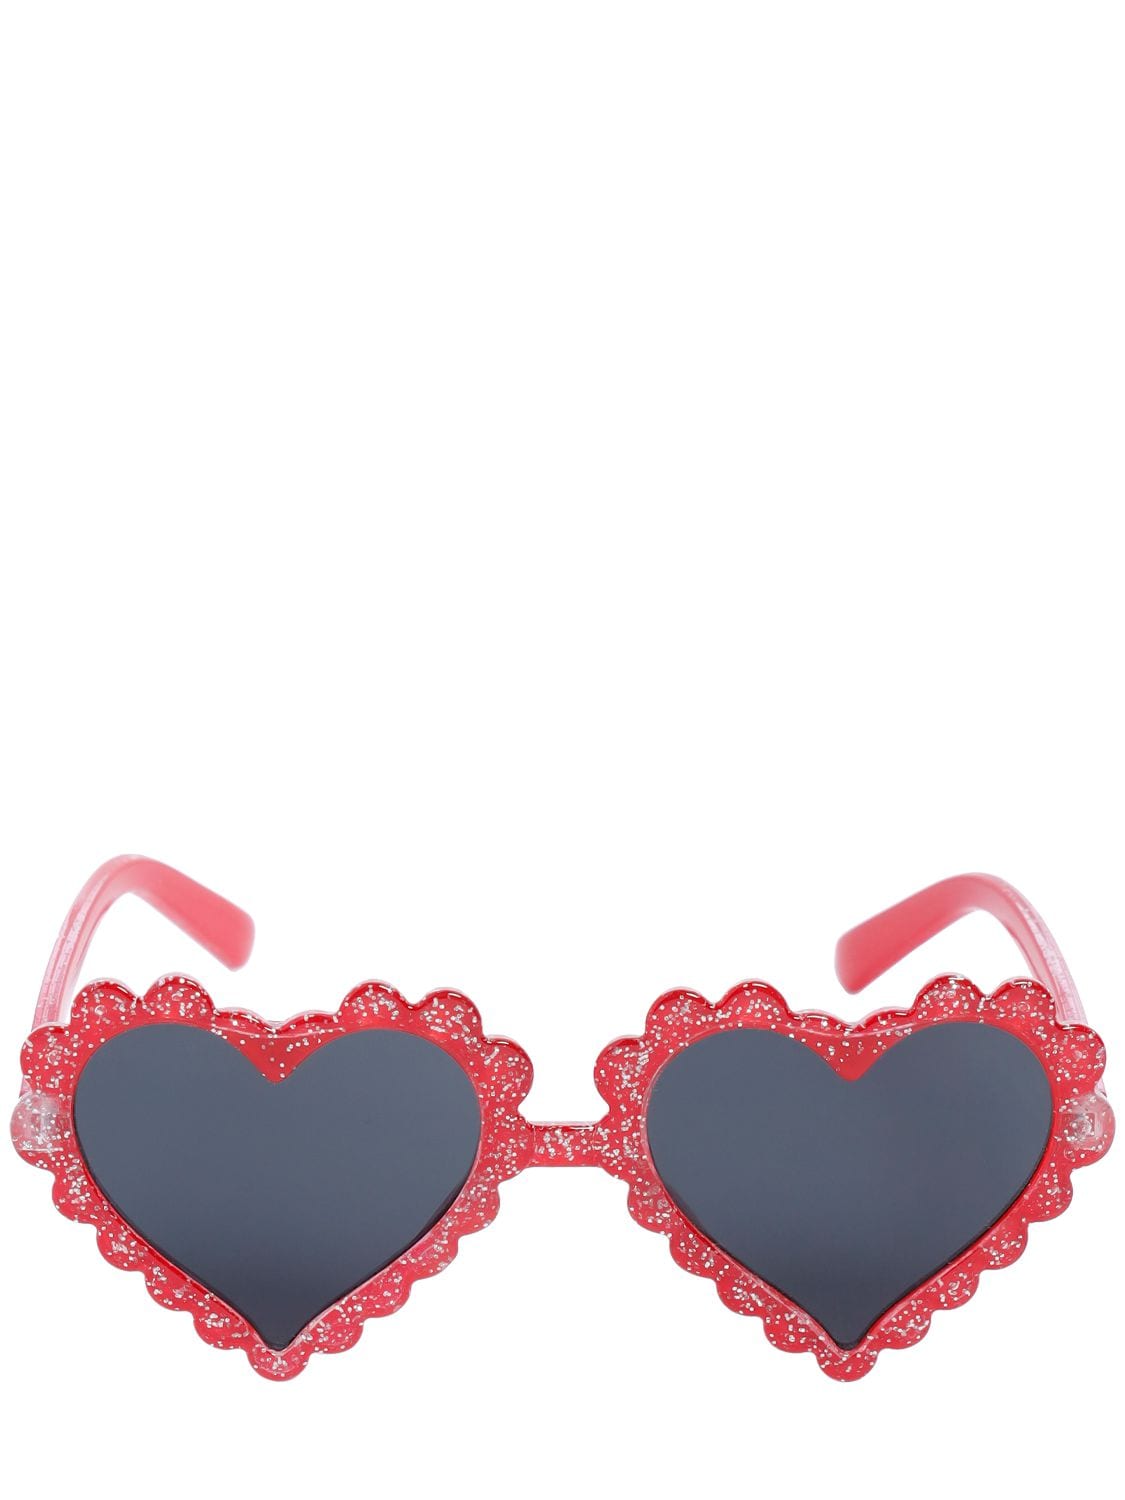 Monnalisa Kids' Heart-shaped Polycarbonate Sunglasses In Red